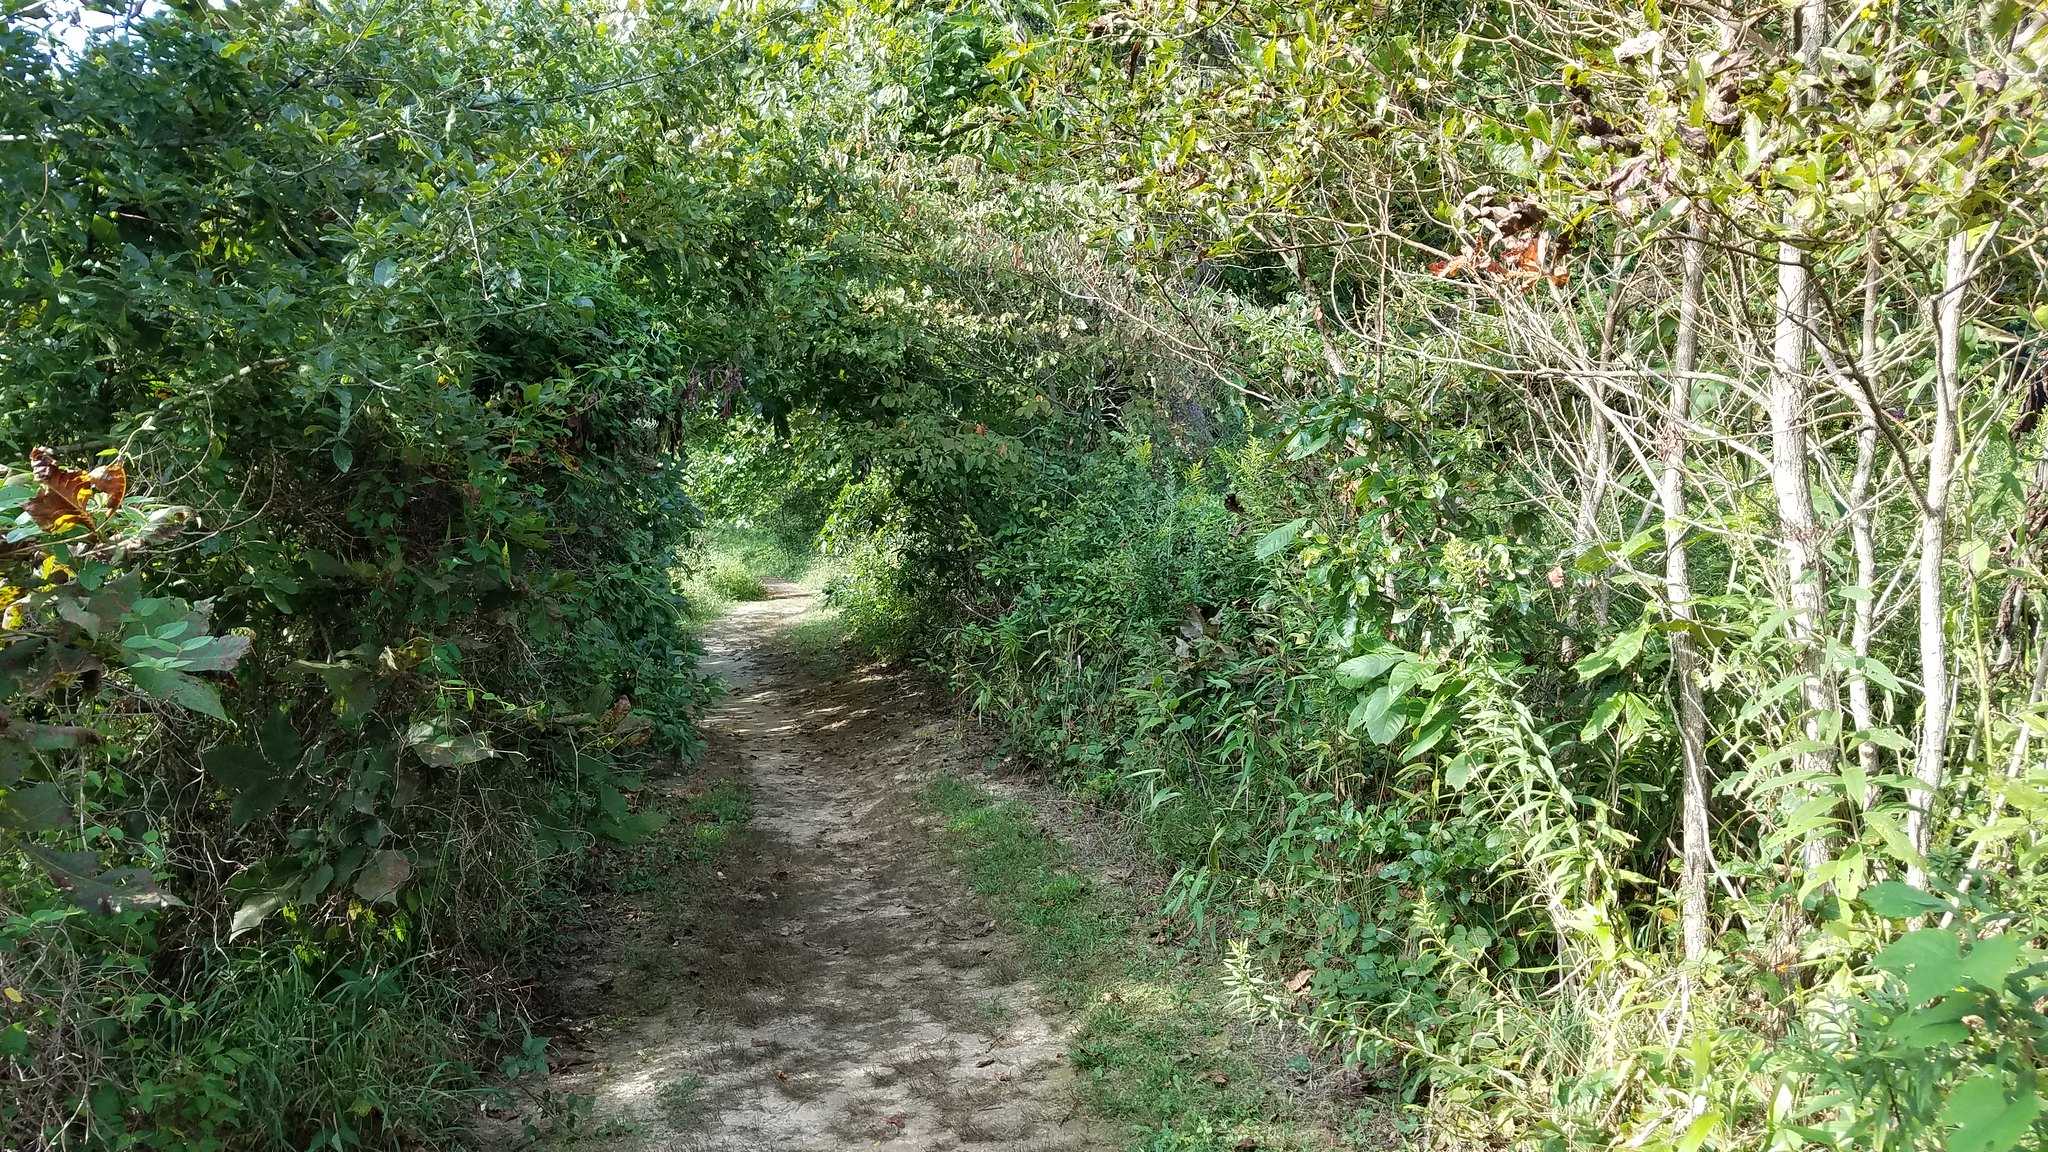 horizontal photo of the trail at rockbridge state nature preserve, with the trees creating an arched walkway